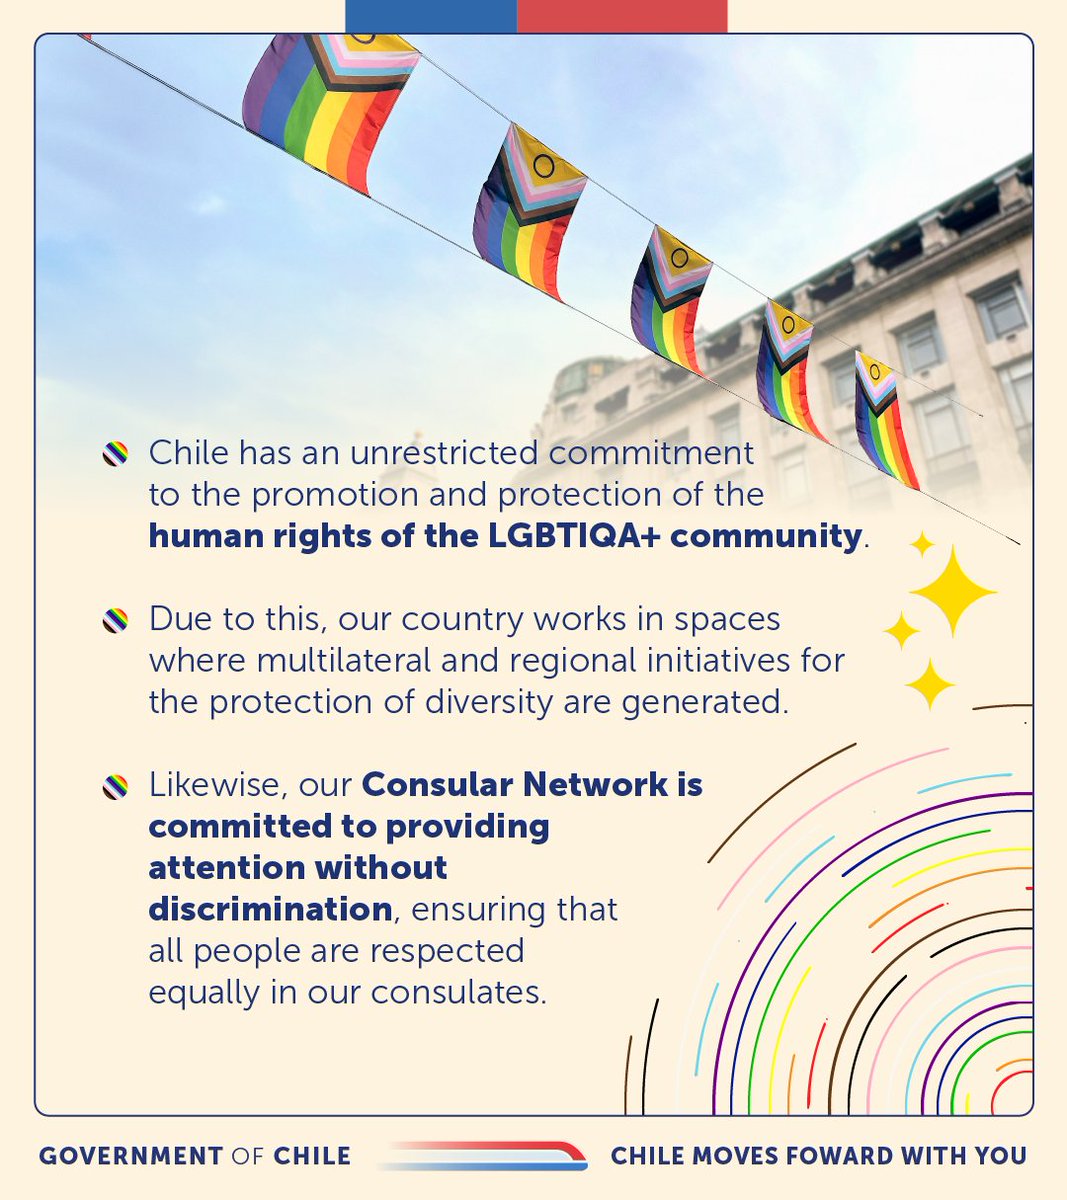 Today we commemorate the #IDAHOT, where we reaffirm our commitment and work for the promotion and protection of the human rights of the LGBTIQA+ community, from multilateral instances to the services we provide to citizens. 🇨🇱🏳️‍🌈🏳️‍⚧️